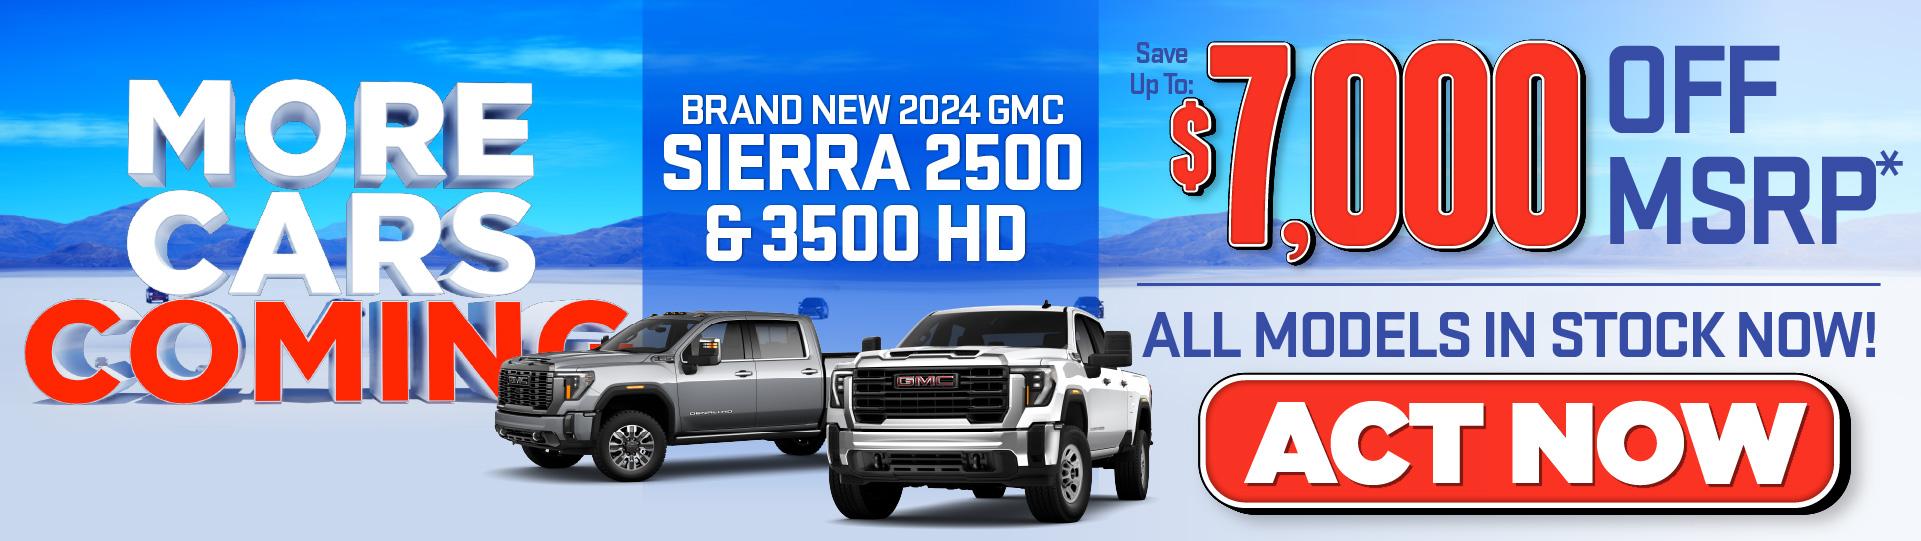 save up to $7,000 off MSRP on Sierra 2500 and 3500* 